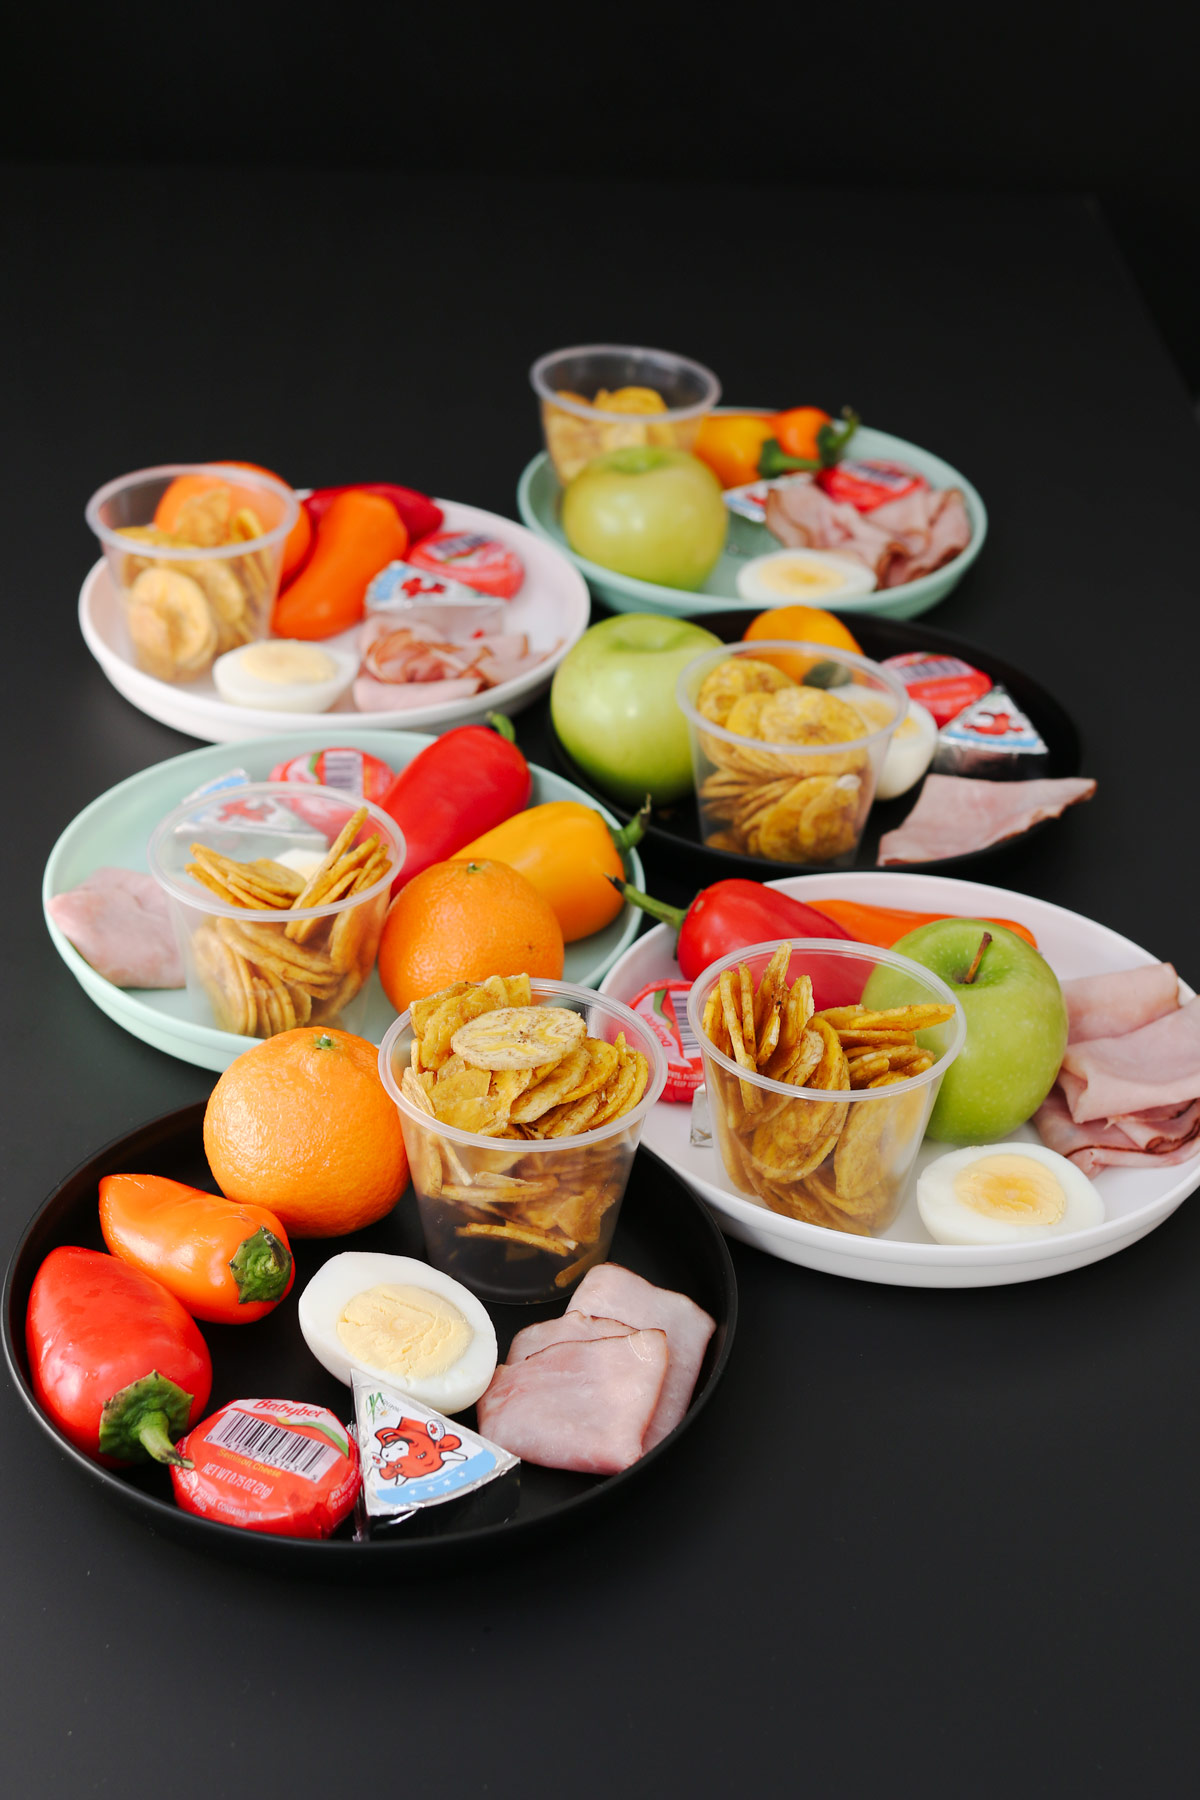 a collection of snack lunches prepared on plates of different colors.